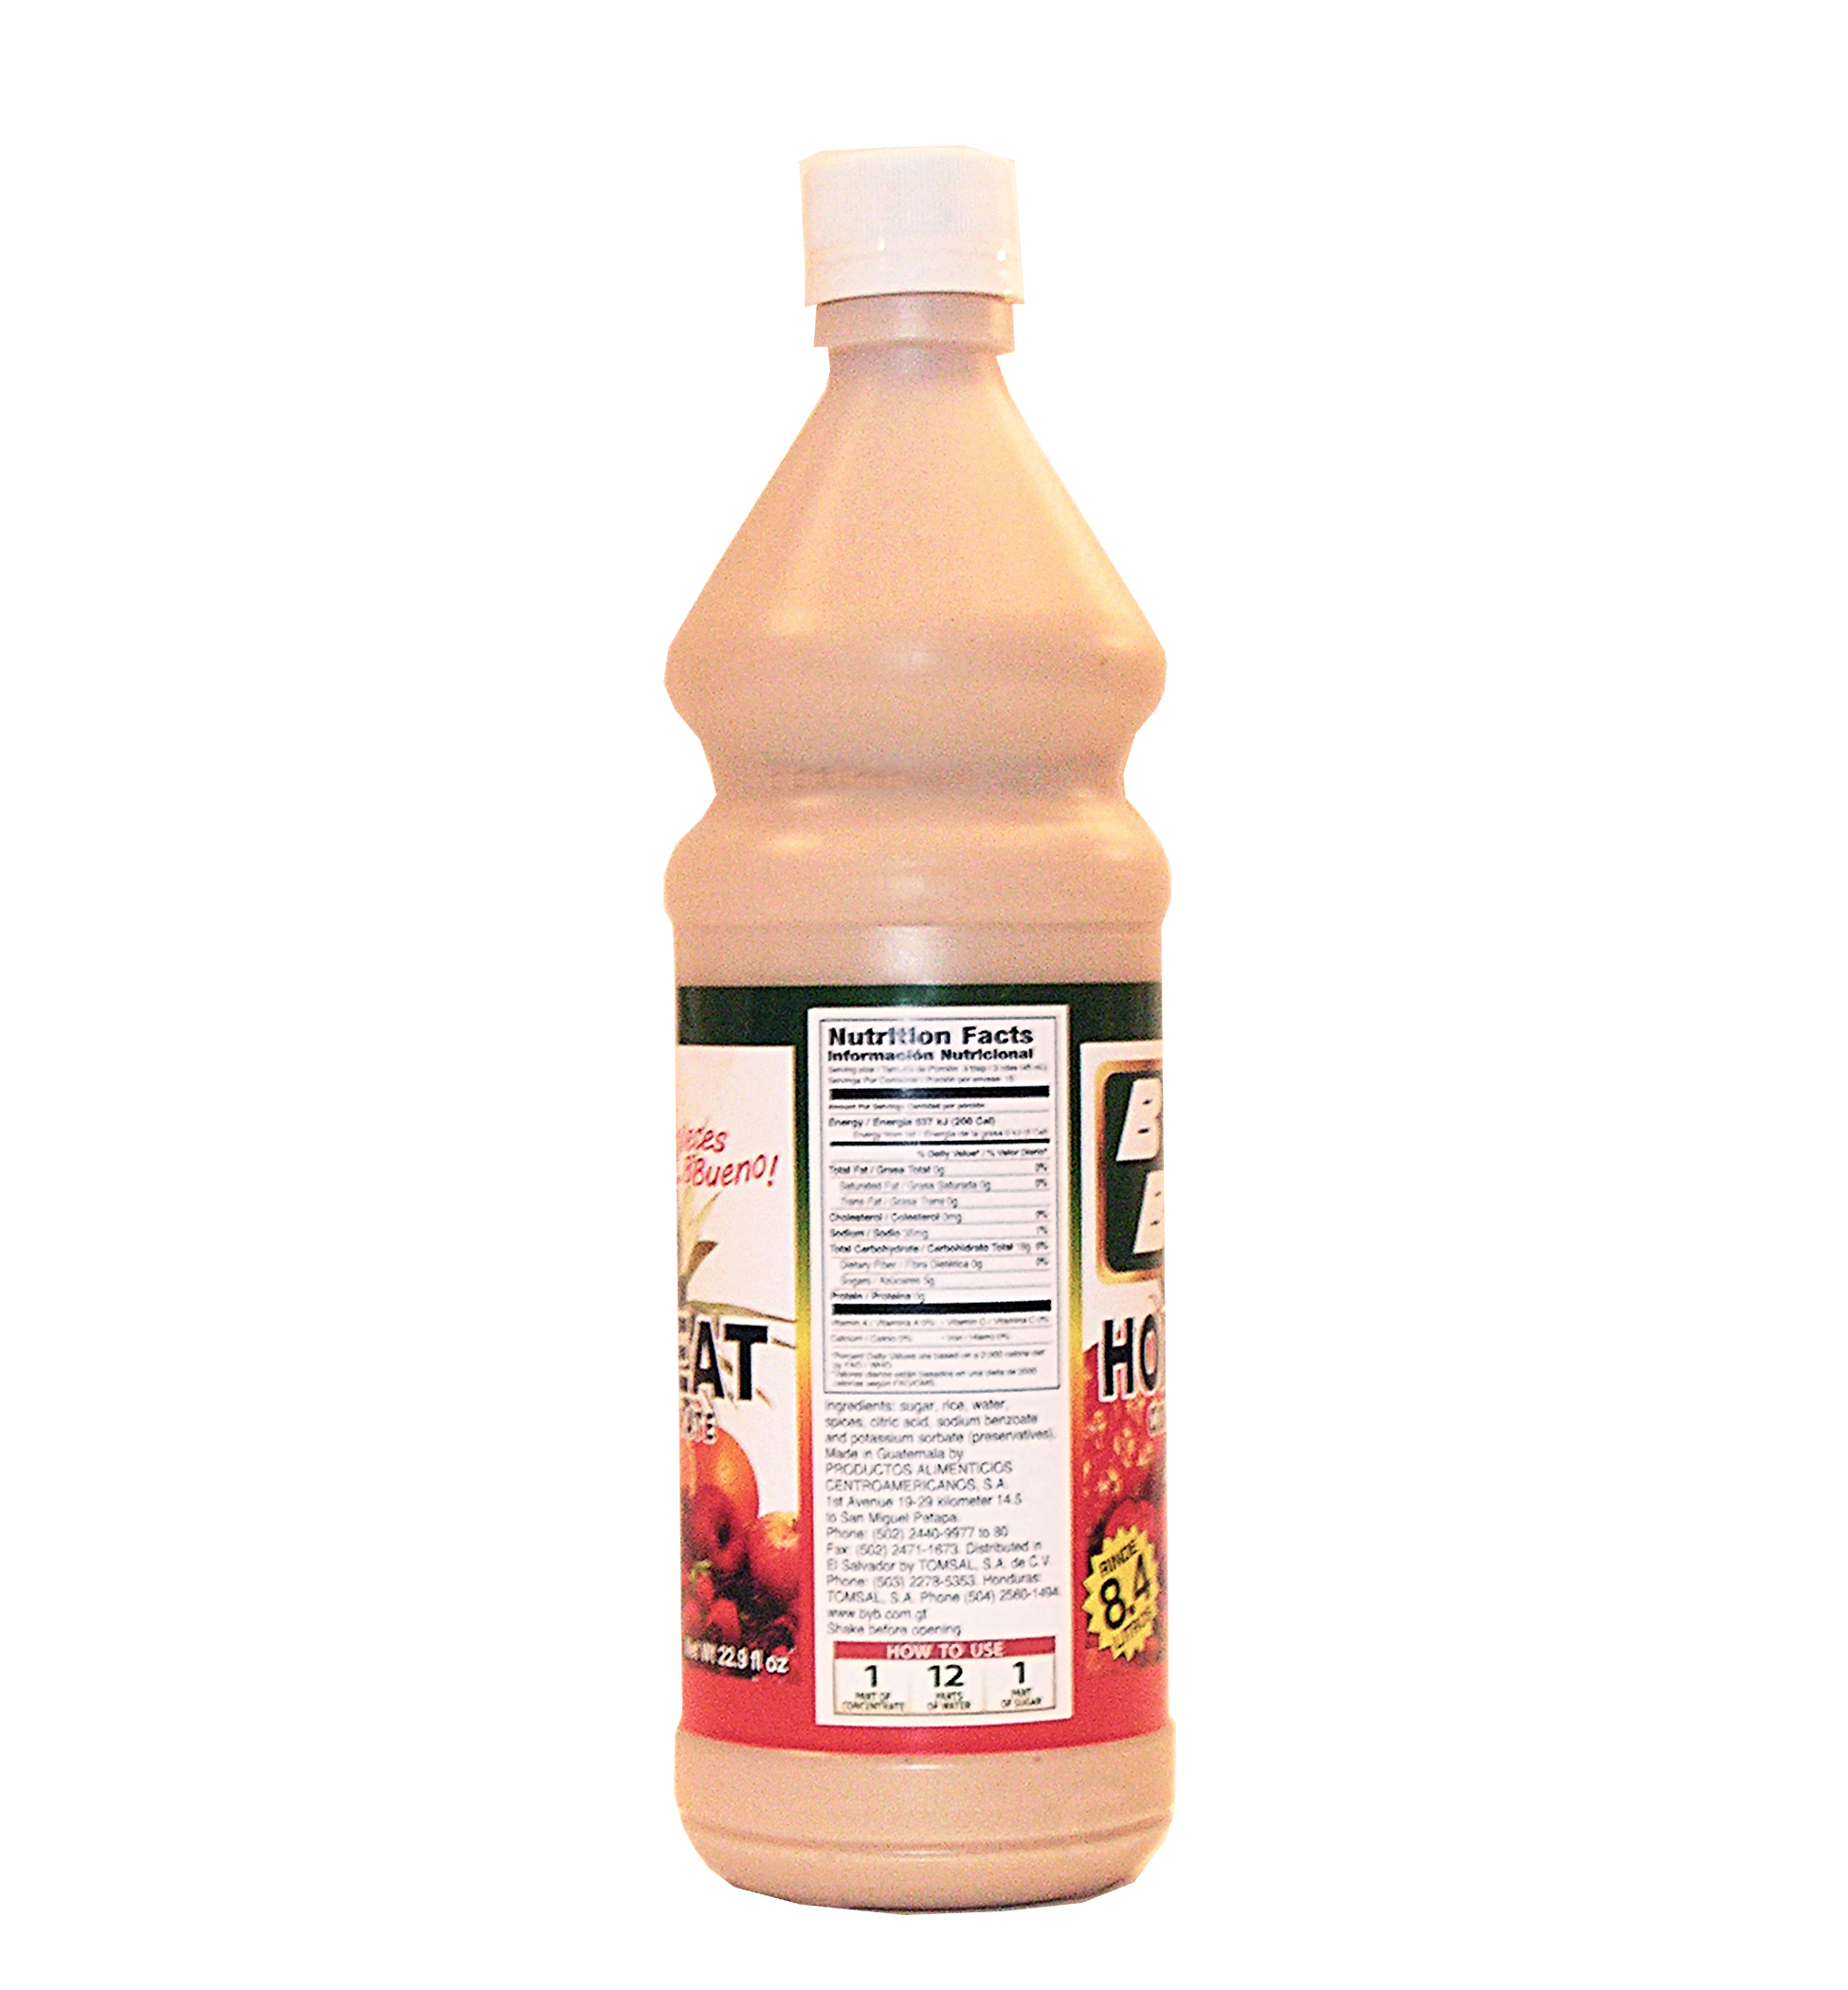 B&B Orgeat Concentrate 22.9 oz - Concentrado de Horchata (Pack of 1) - image 3 of 4